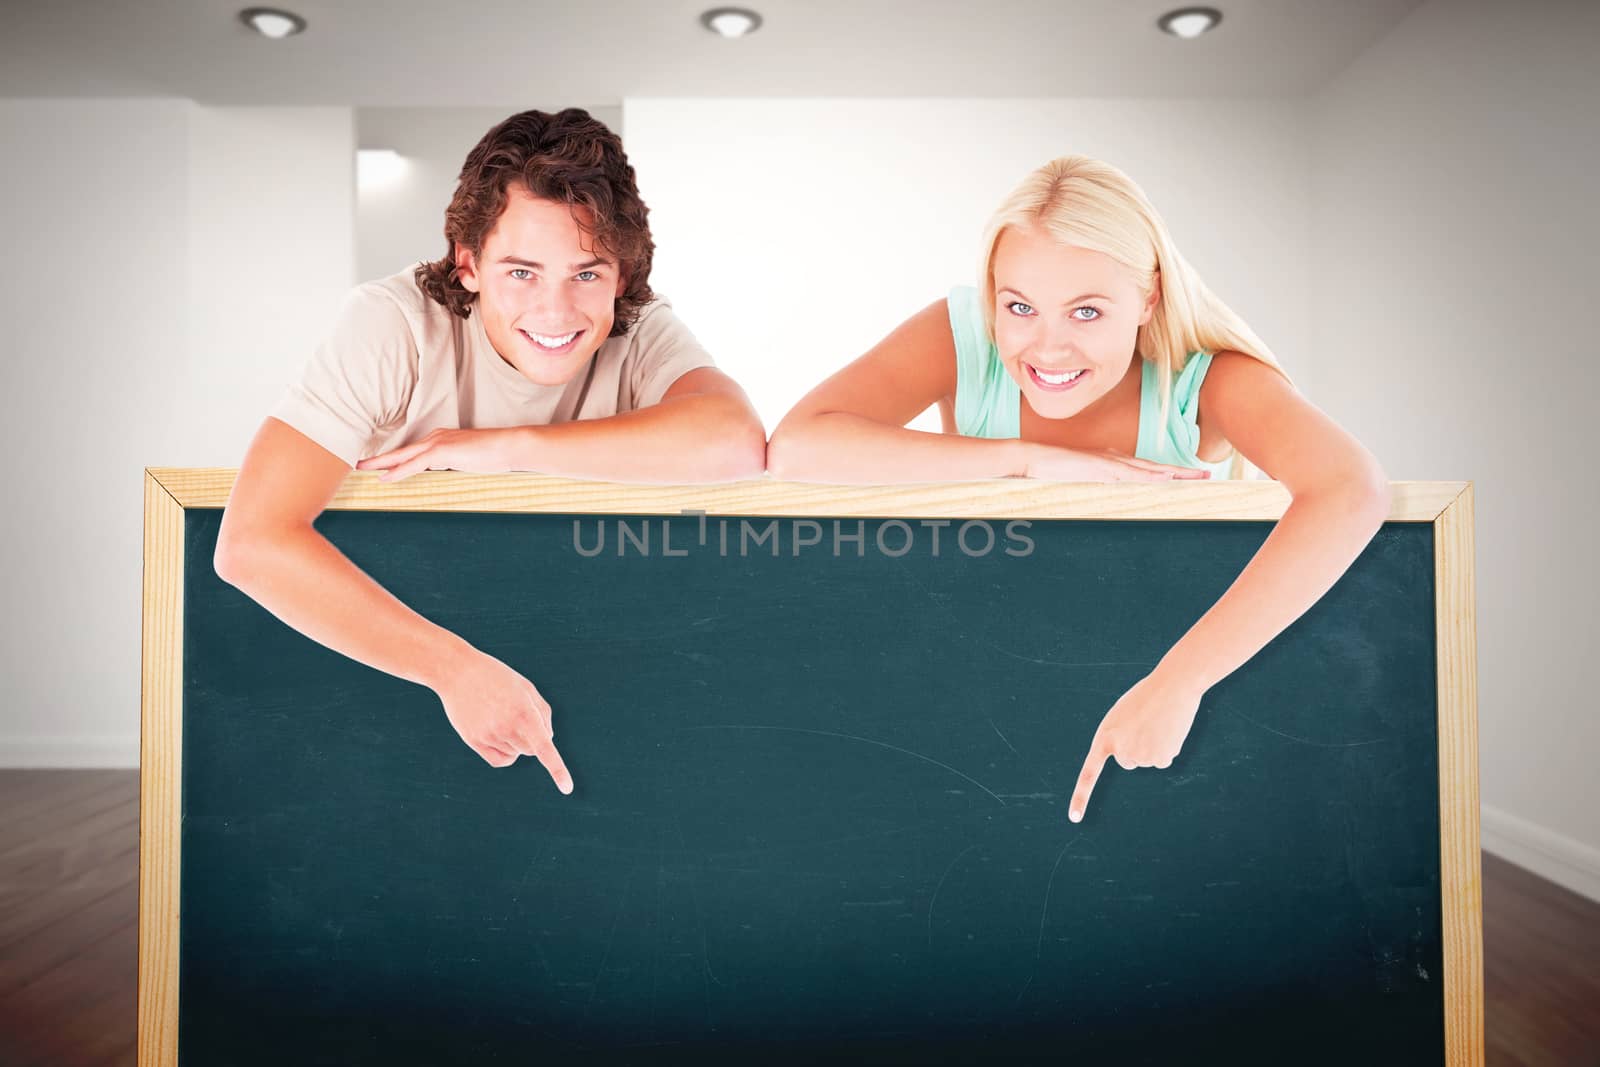 Man and cute woman pointing on a whiteboard against white room with stairs